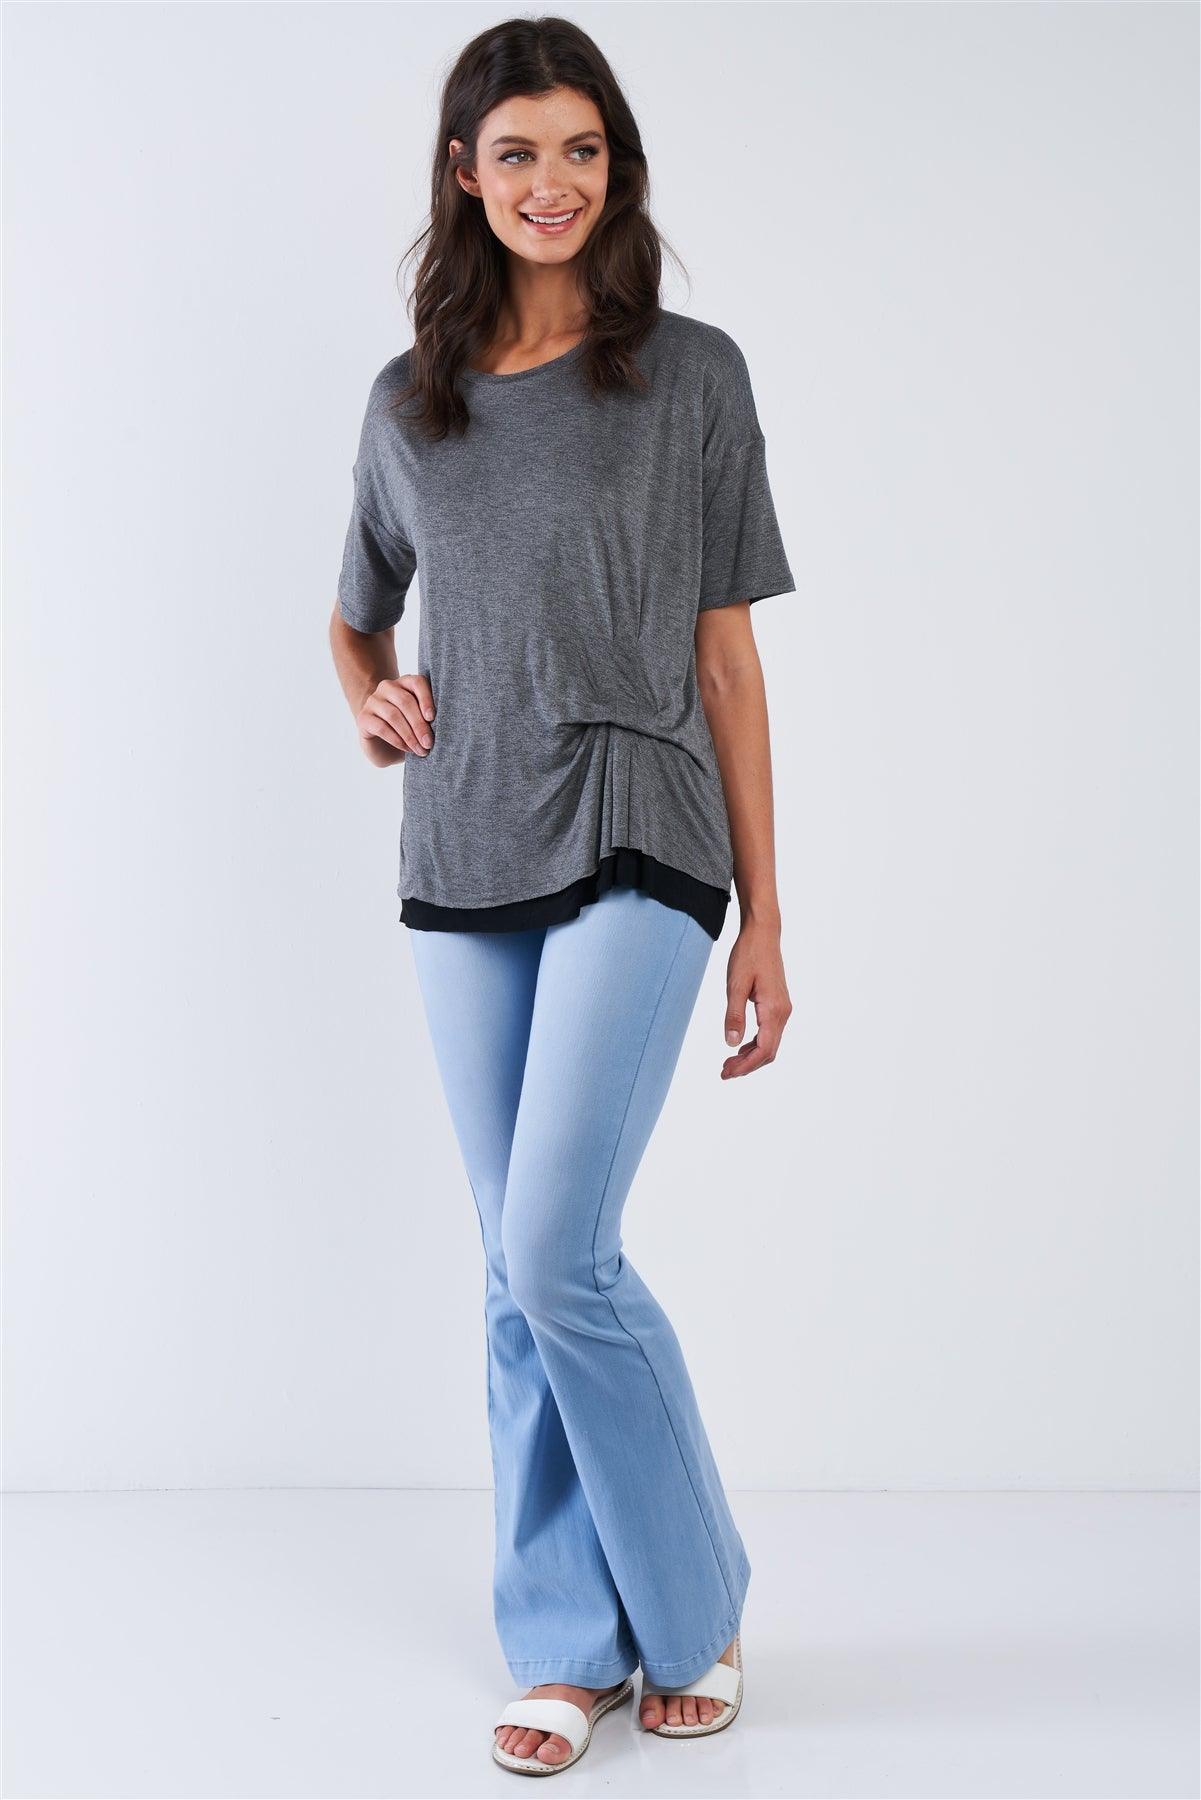 Charcoal Layered Soft Loose Fit Short Sleeve Top With One Sided Cinched Seam